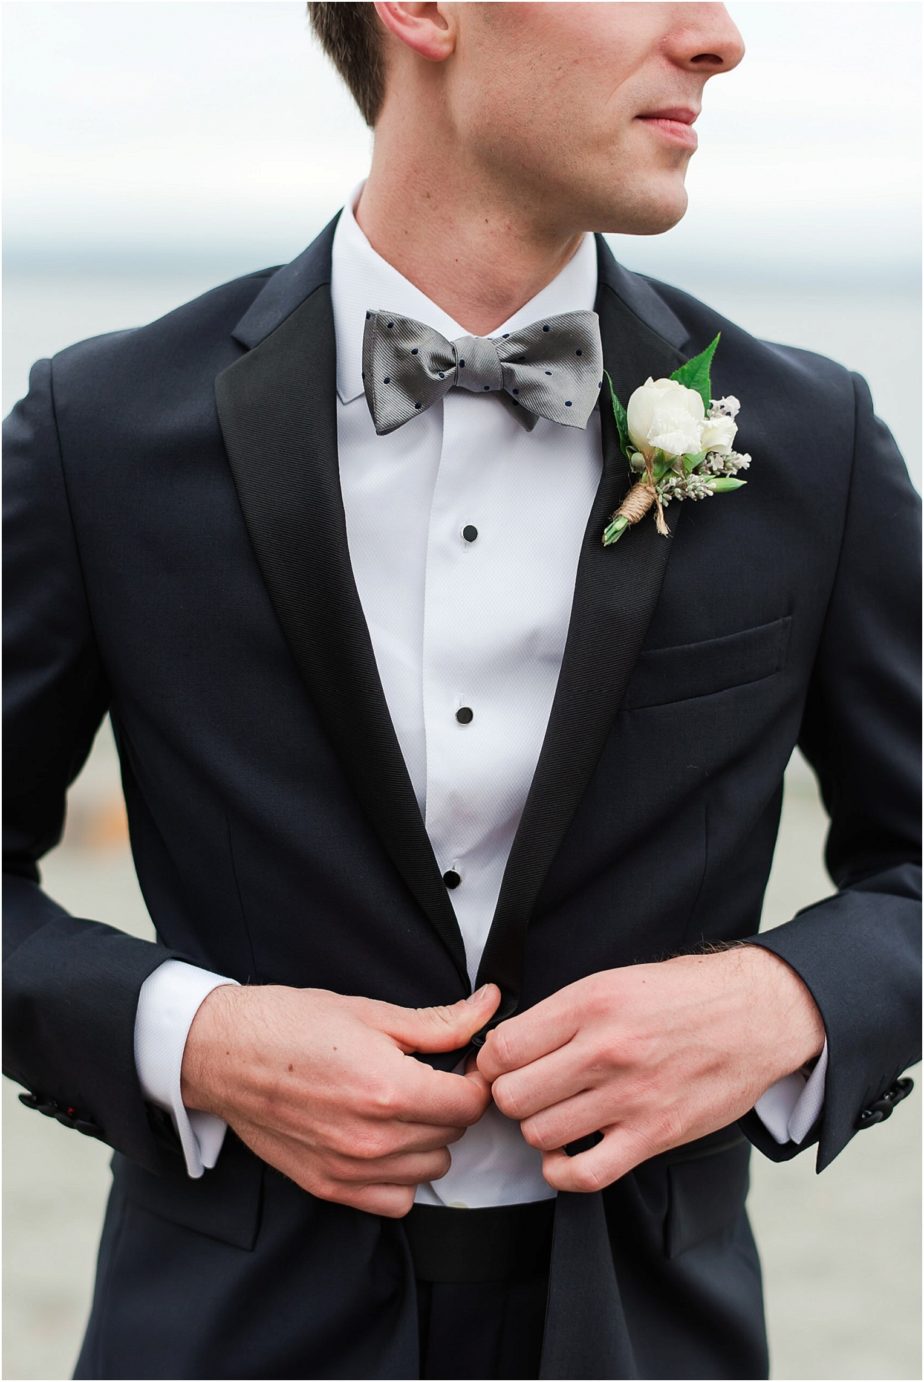 Favorite wedding florals of 2018 for brides Simple white boutonniere 